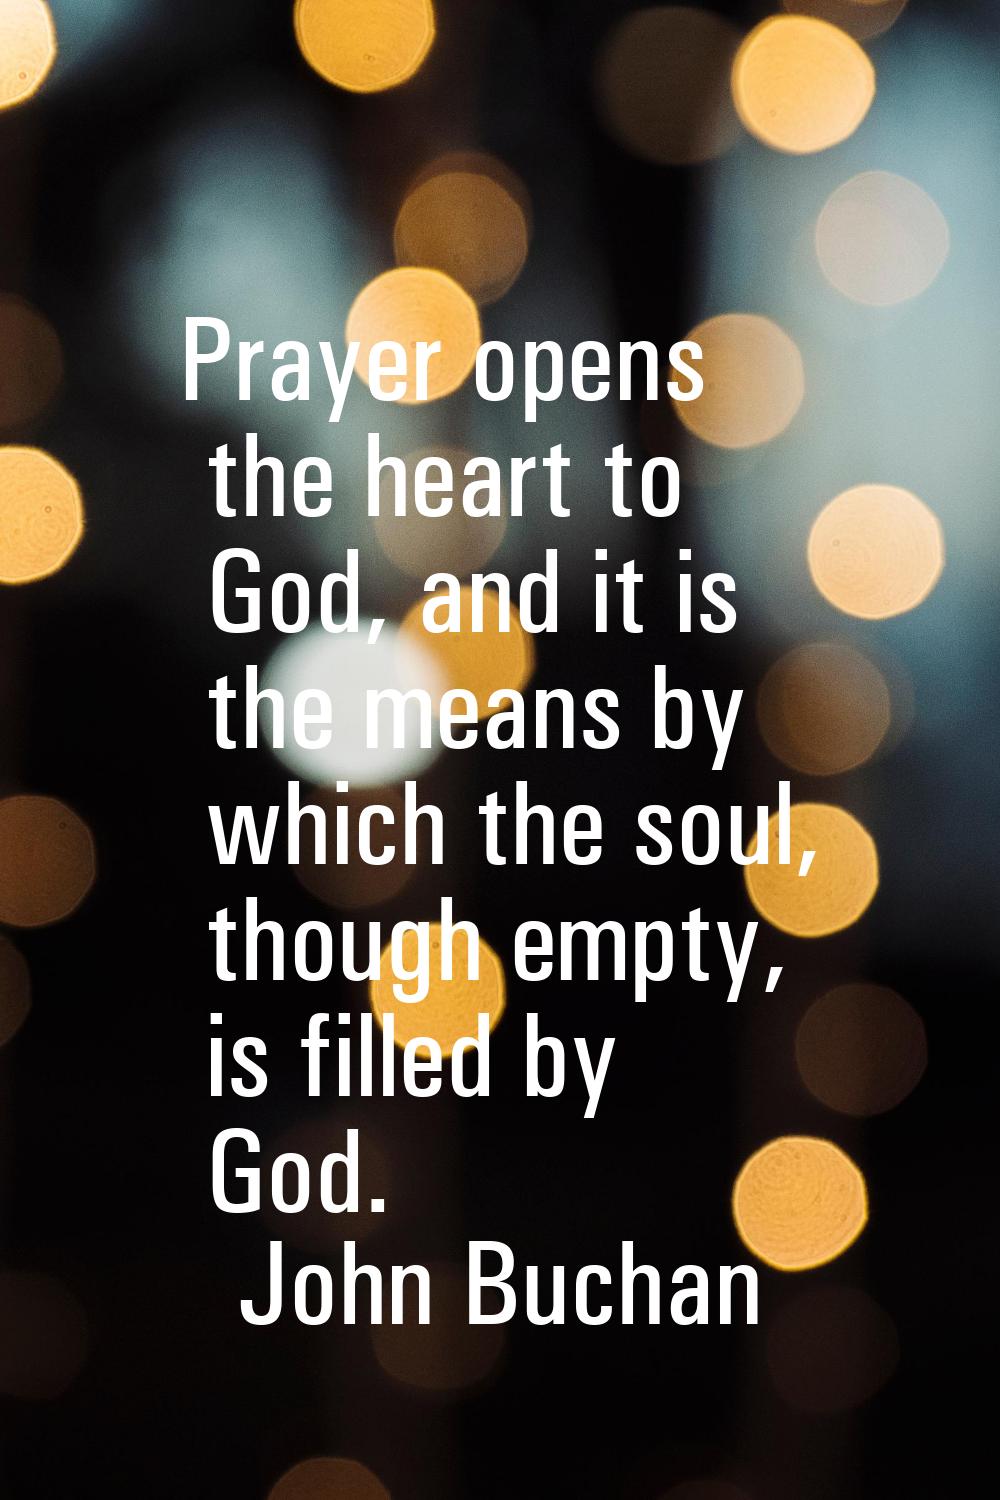 Prayer opens the heart to God, and it is the means by which the soul, though empty, is filled by Go